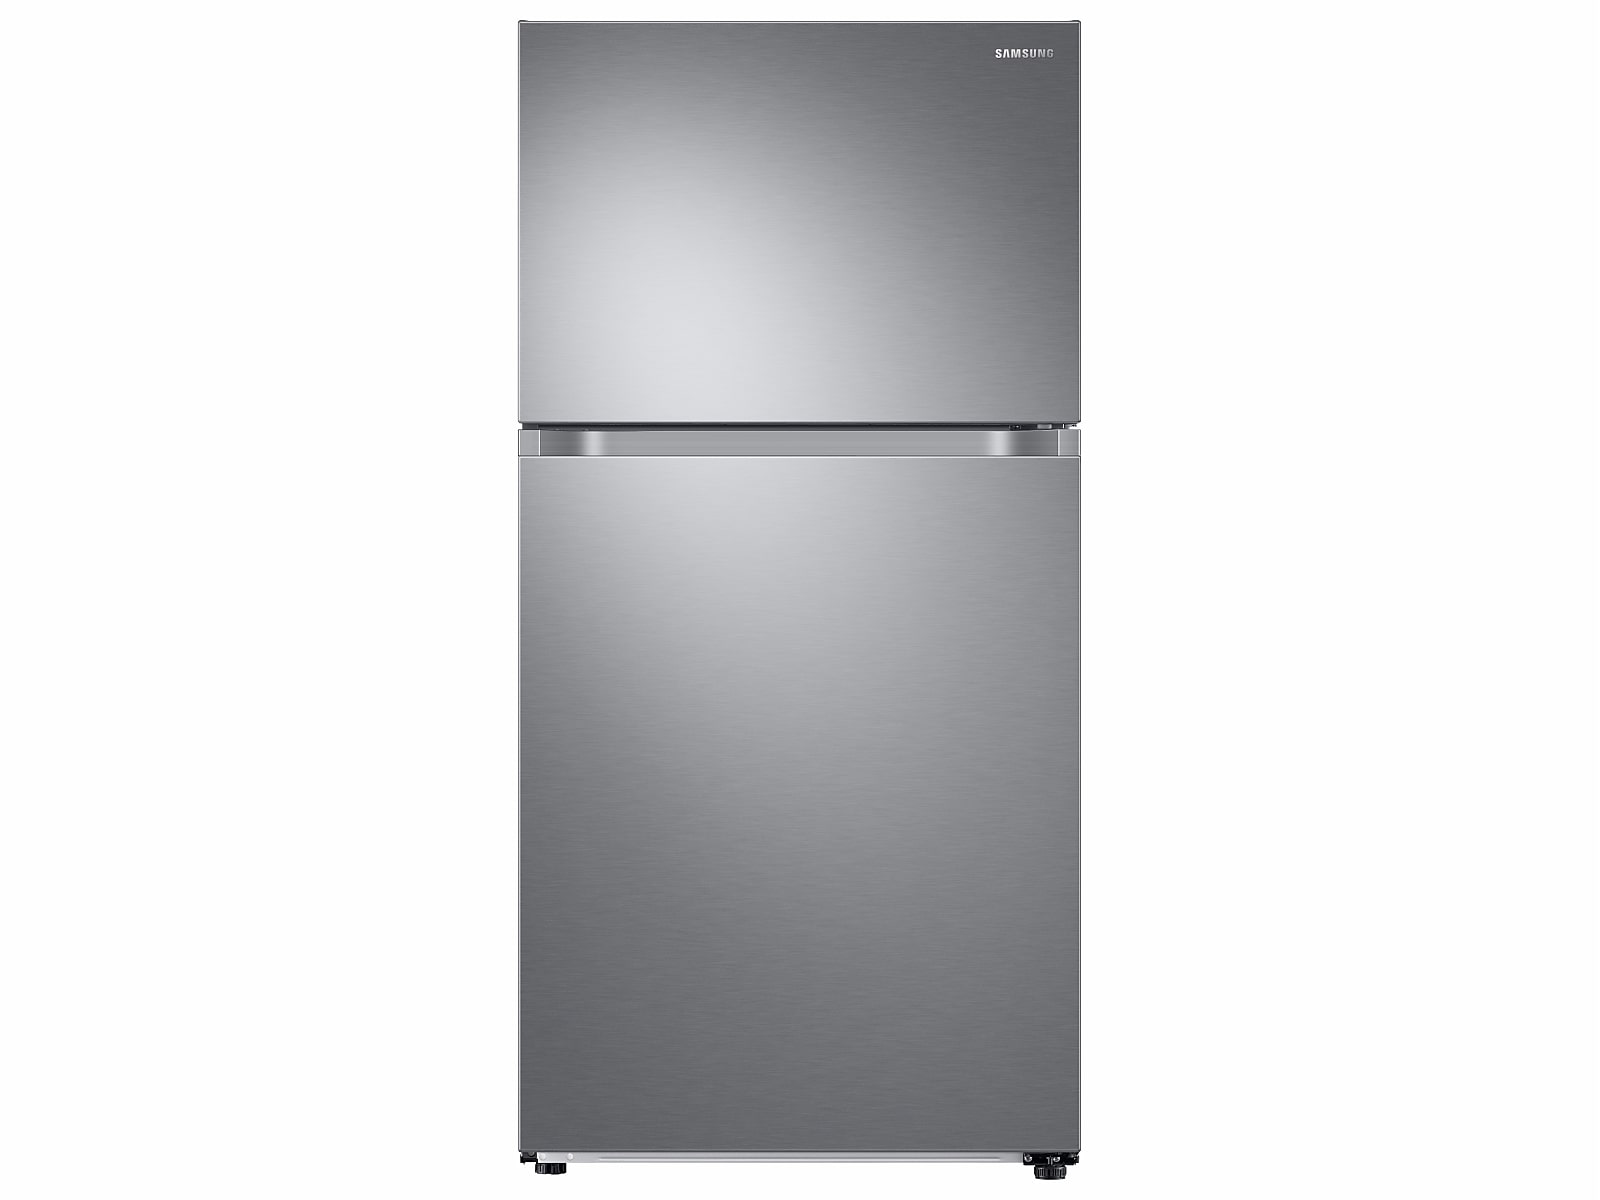 Samsung 21 cu. ft. Top Freezer Refrigerator with FlexZone™ and Ice Maker in Silver(RT21M6215SR/AA) photo